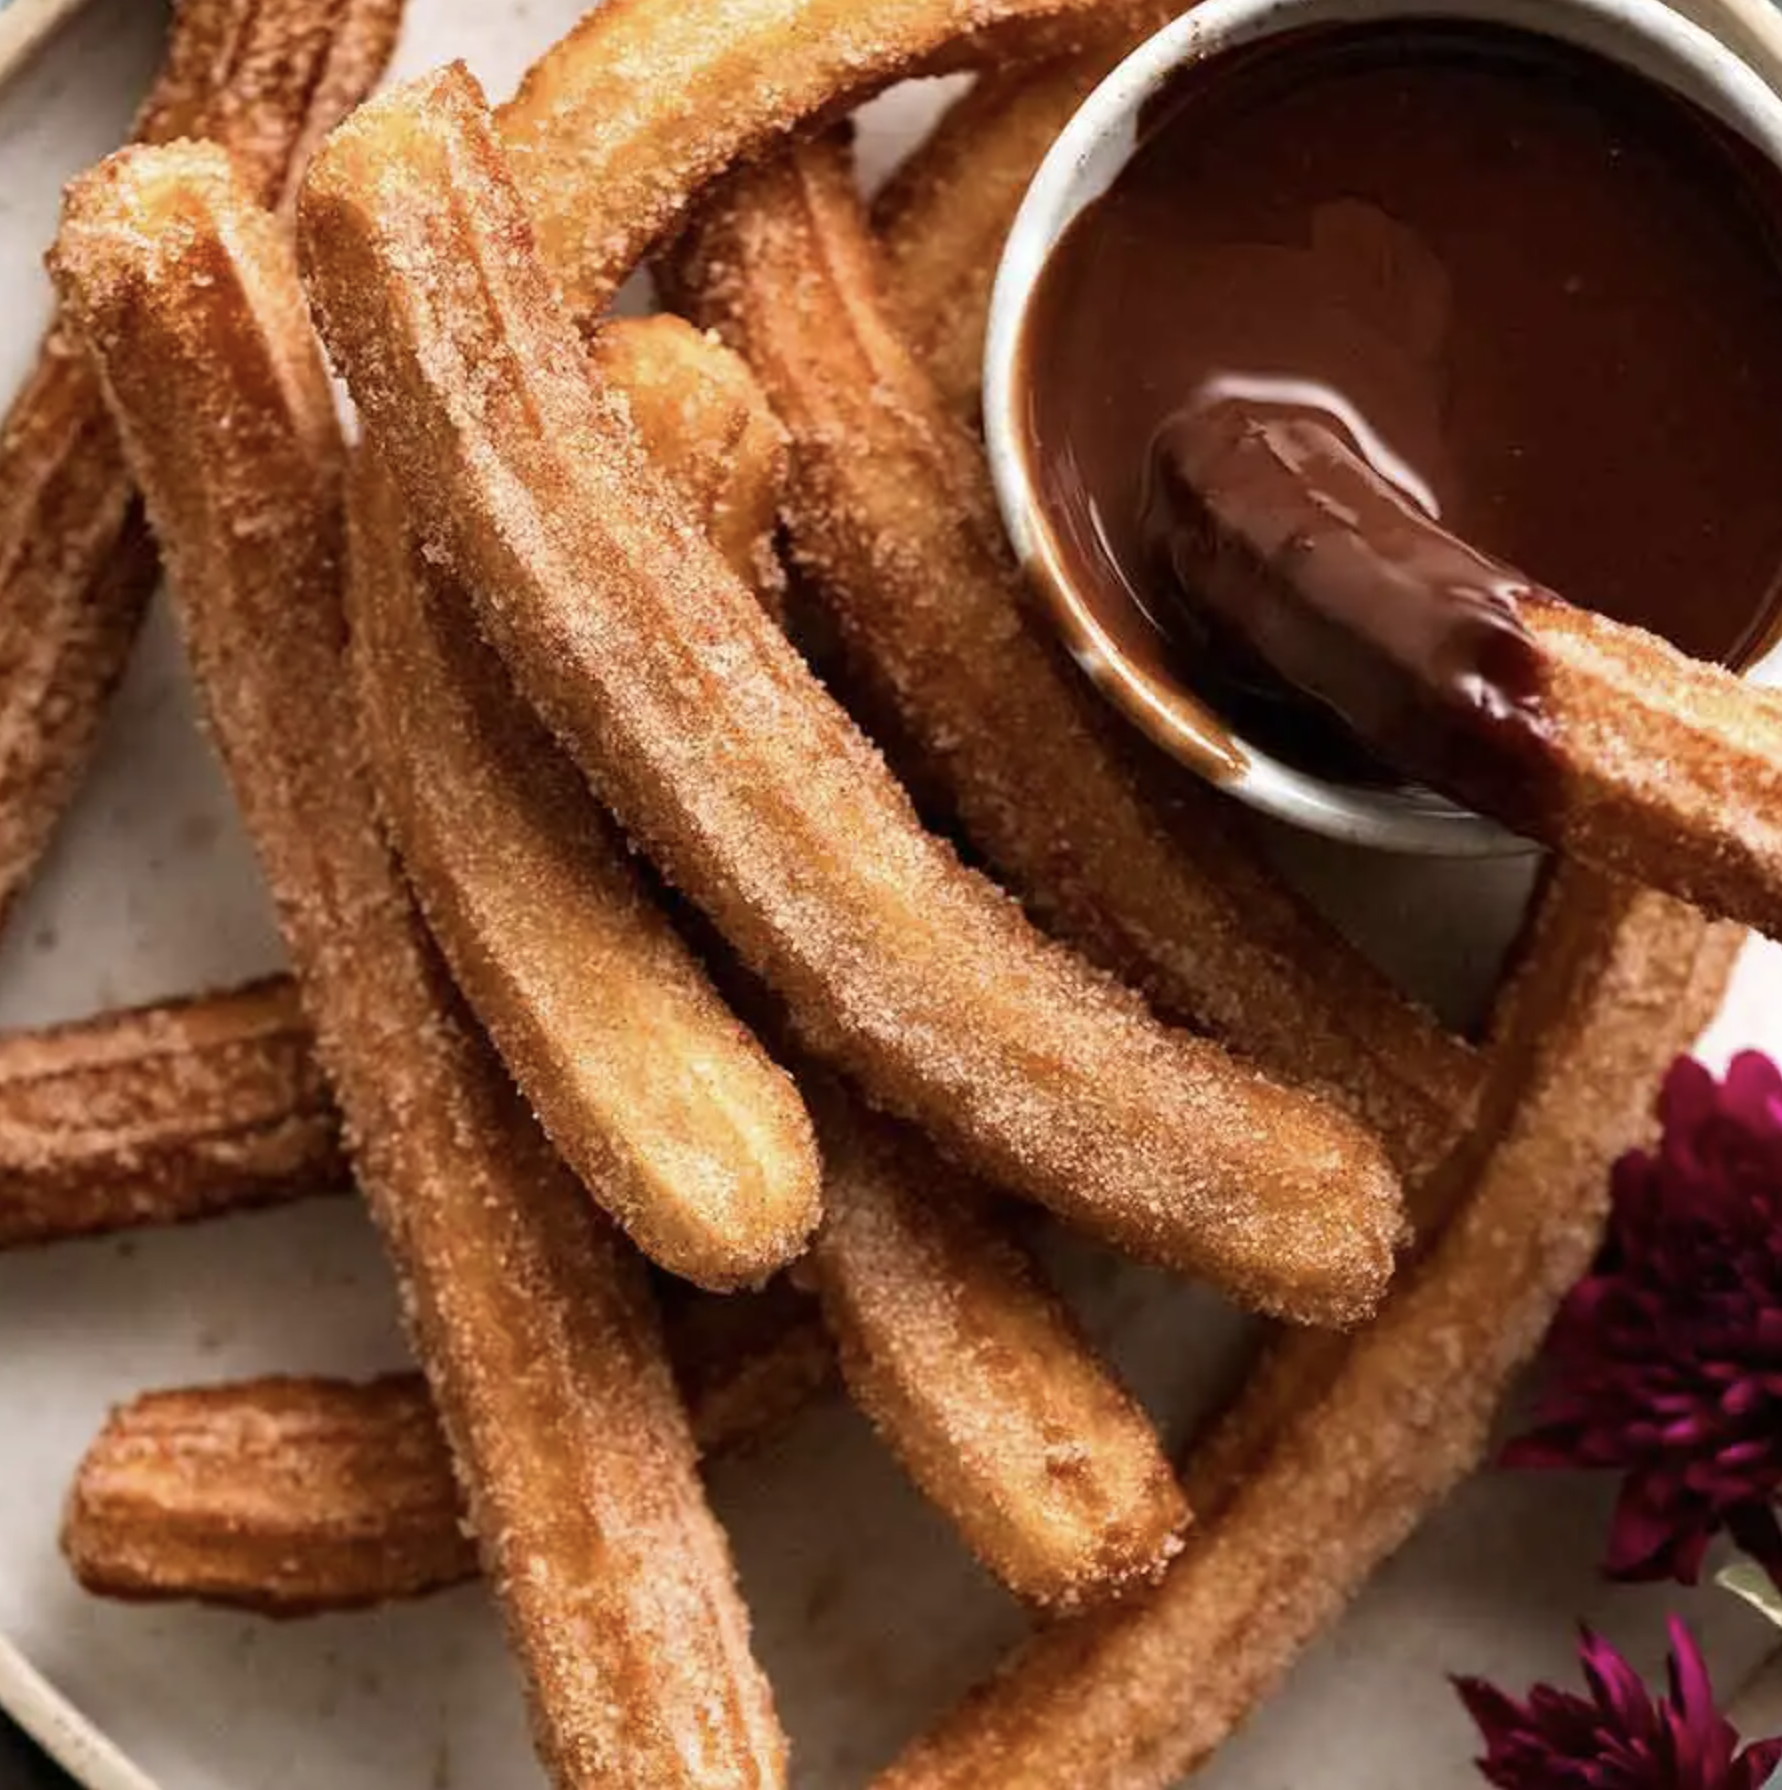 Image of churros and a chocolate dip in the top right corner from an aerial view.